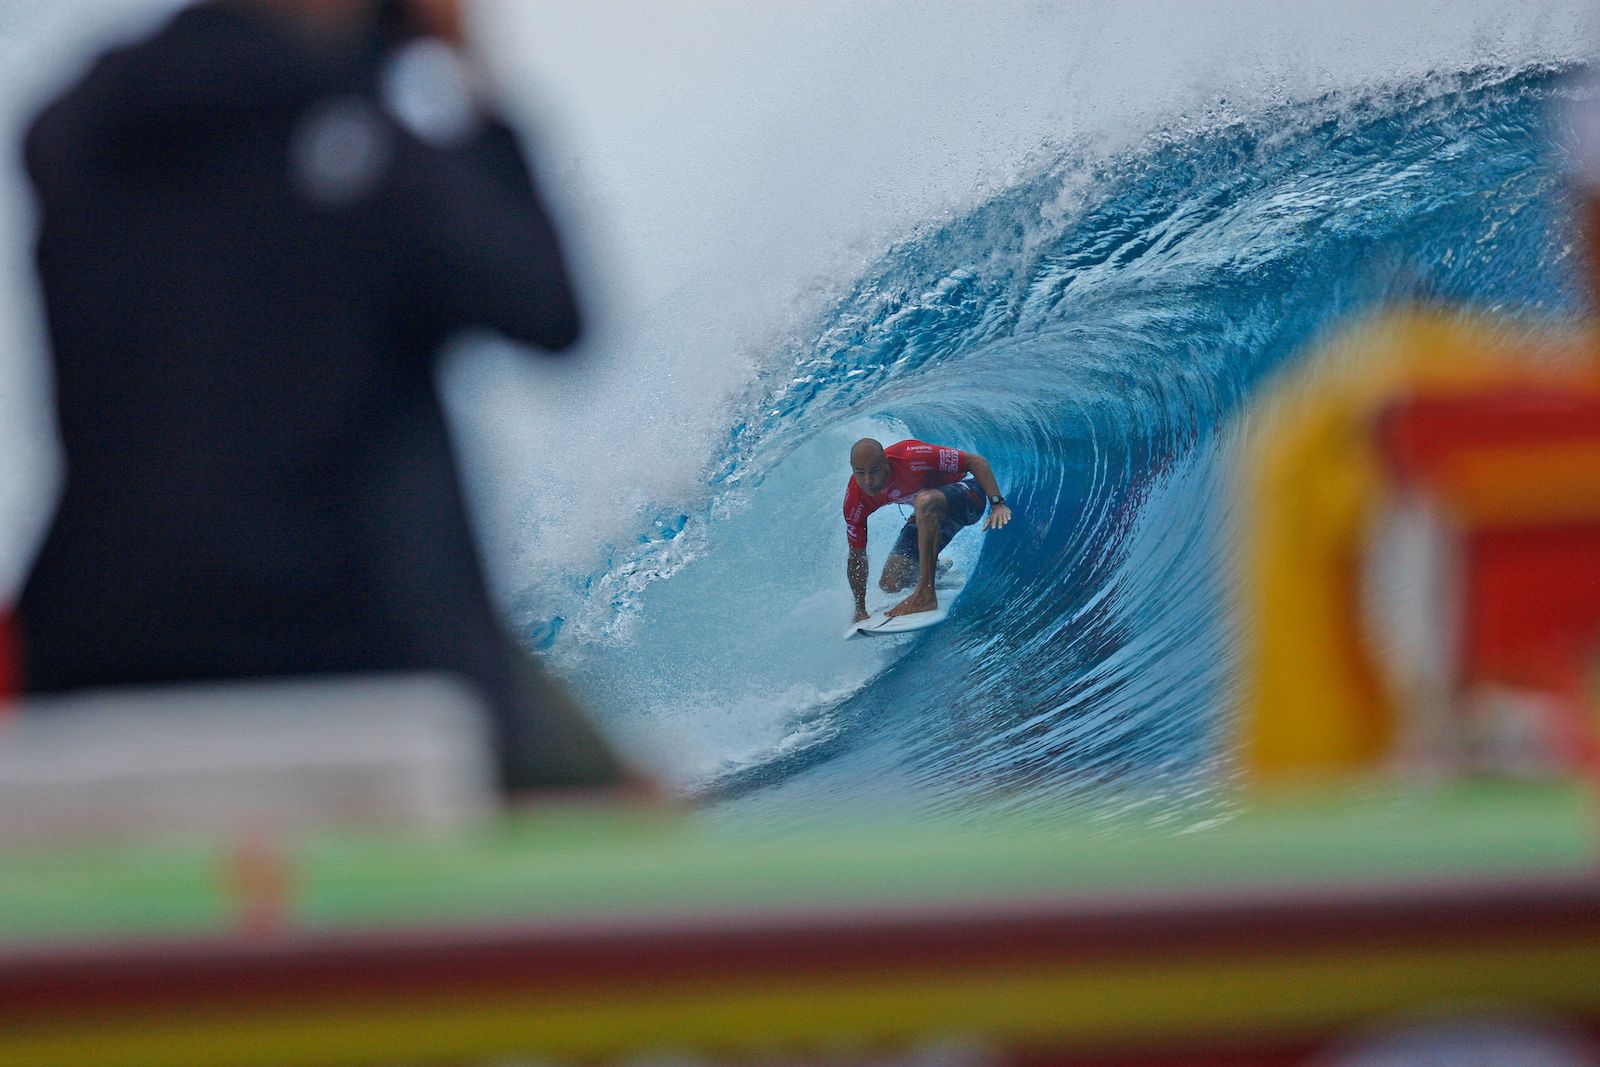 The Annual Outerknown Tahiti Pro Surfs into The Islands of Tahiti Surf